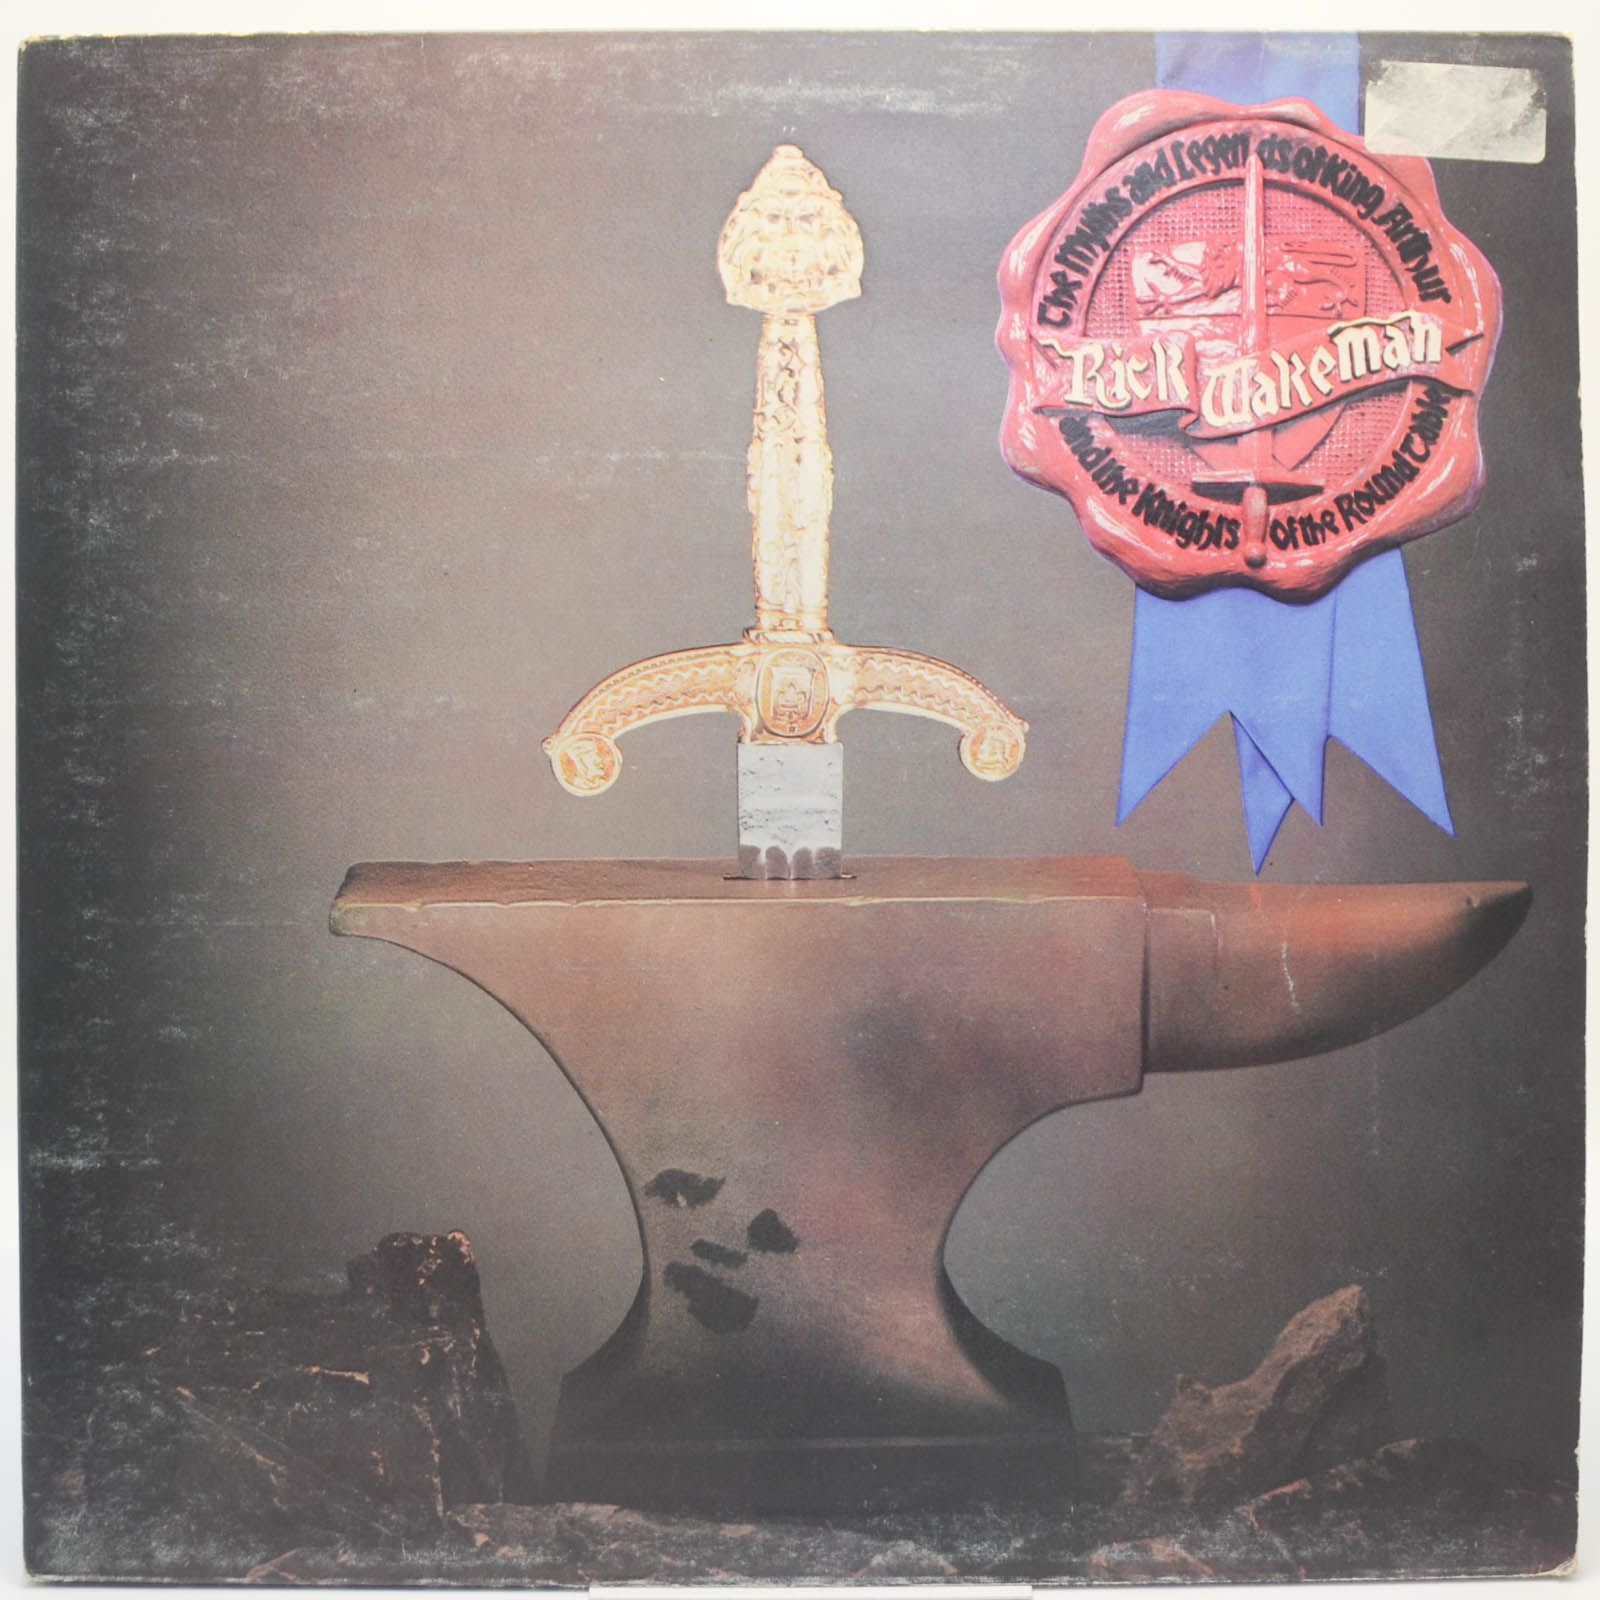 Rick Wakeman — The Myths And Legends Of King Arthur And The Knights Of The Round Table (booklet), 1975